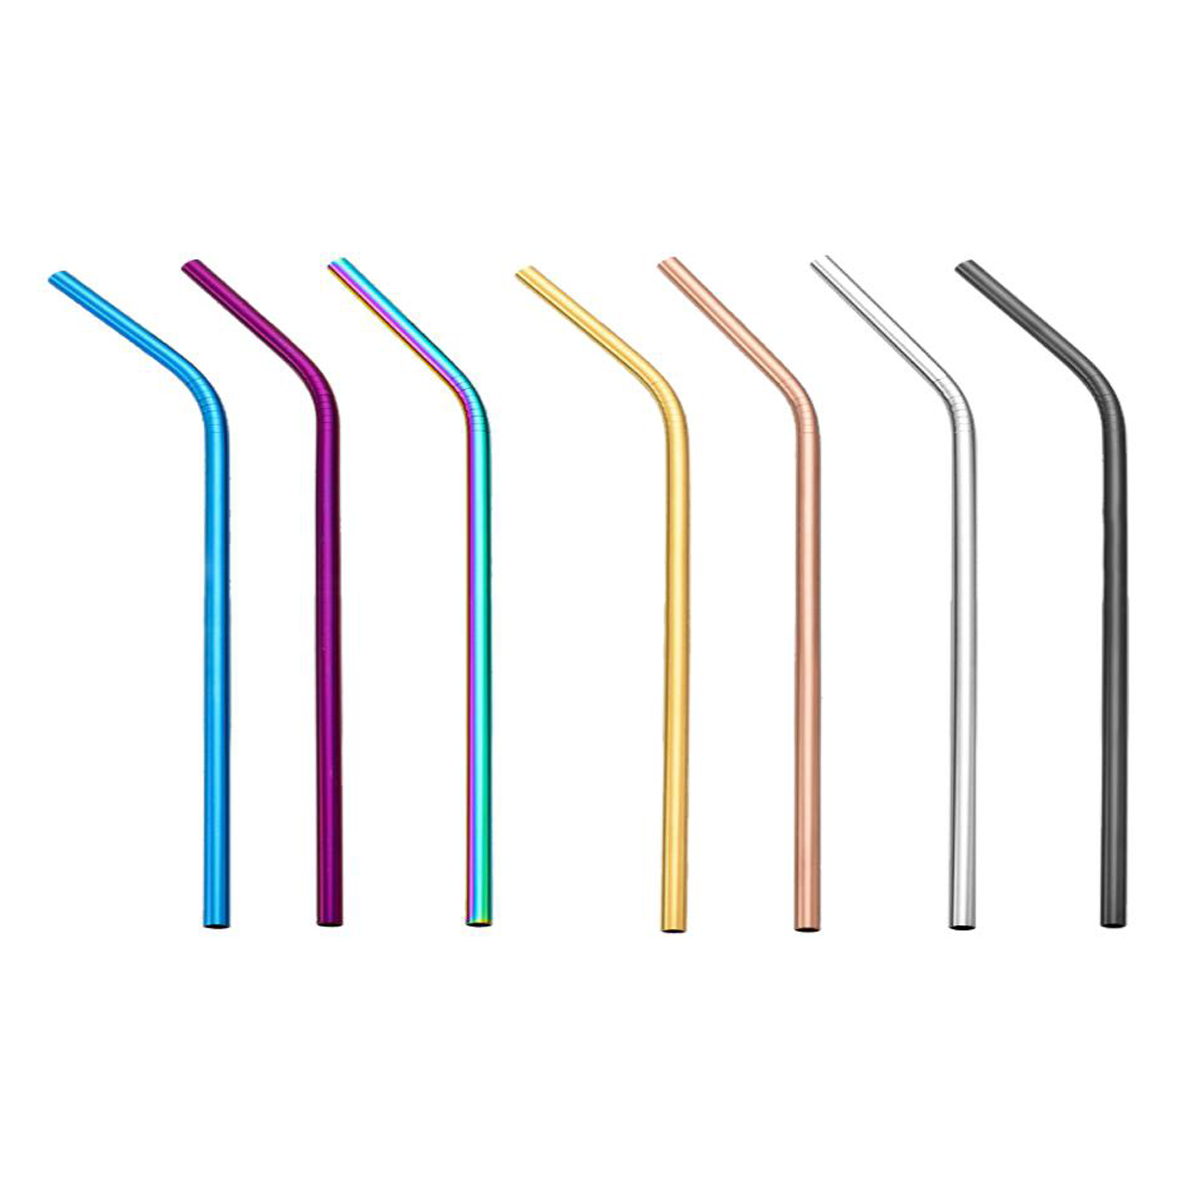 GL-ELY1249 Curved Colored Stainless Steel Straw